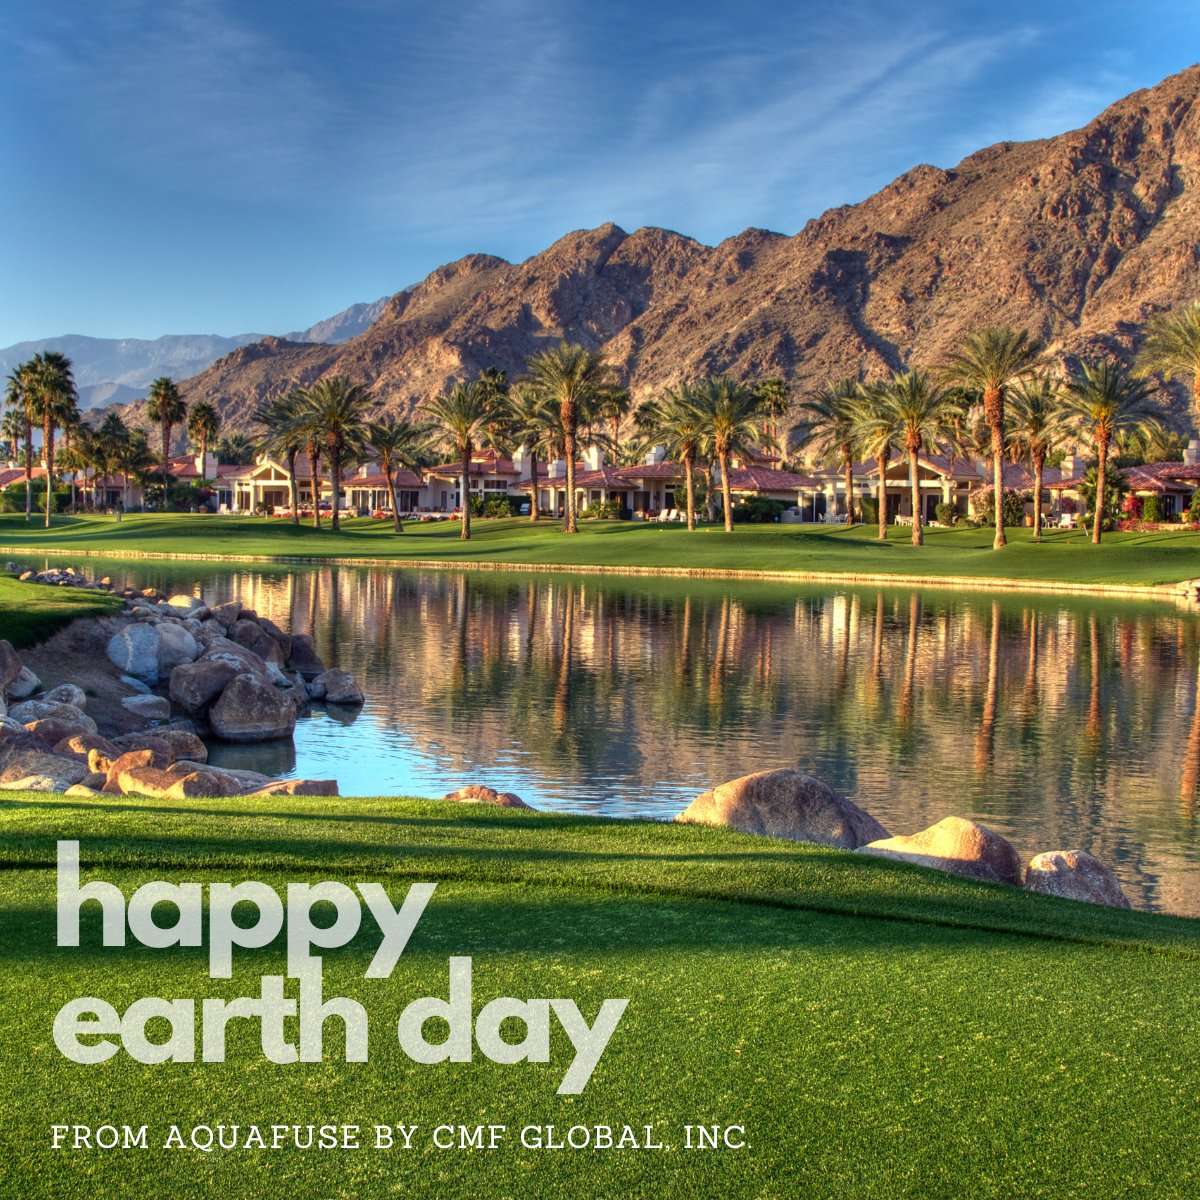 #AquaFuse celebrates Earth Day 2024.

The company strives to improve water conservation with their innovative High-Density Polyethylene (HDPE) high-performance proprietary piping systems called AquaFuse.

#EarthDay #WaterConservation #GolfIrrigation #EarthDay2024 #Golf